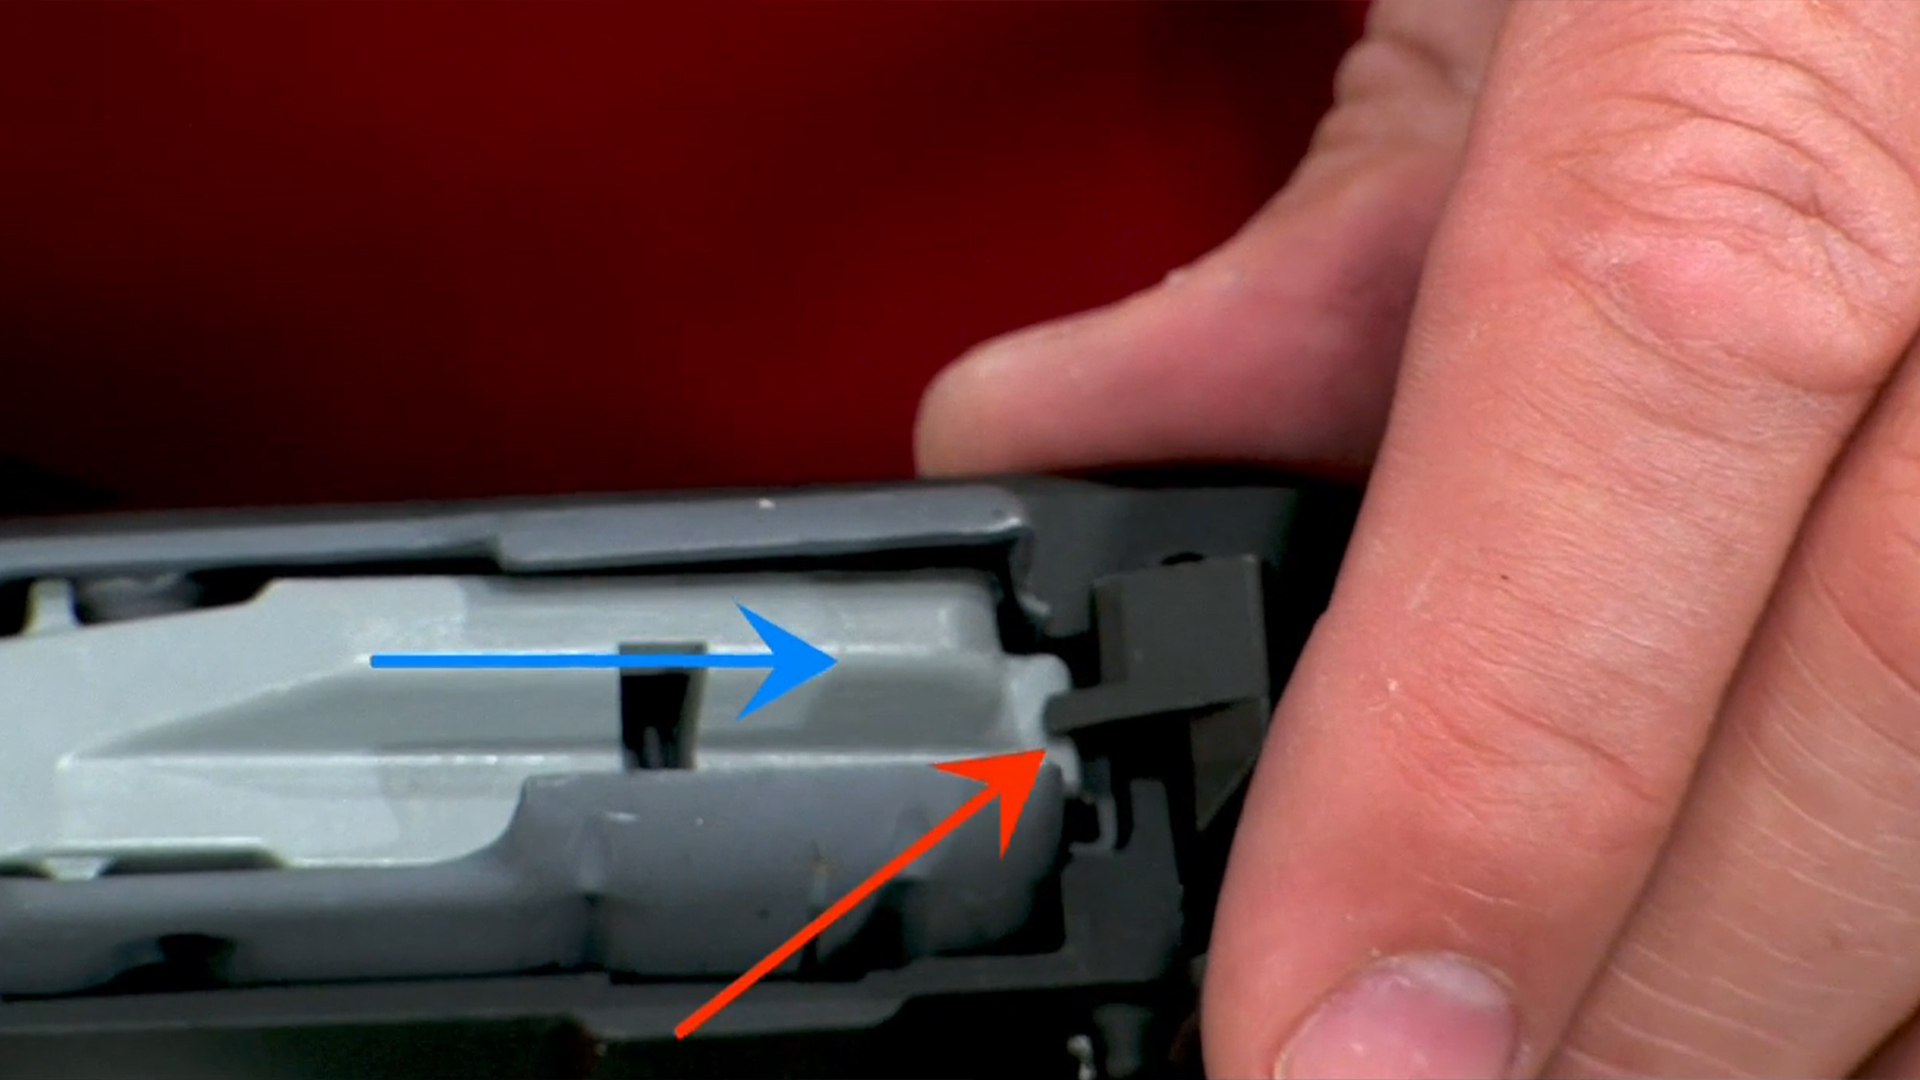 Image relating to How to Install an AR-15 Bolt Stop